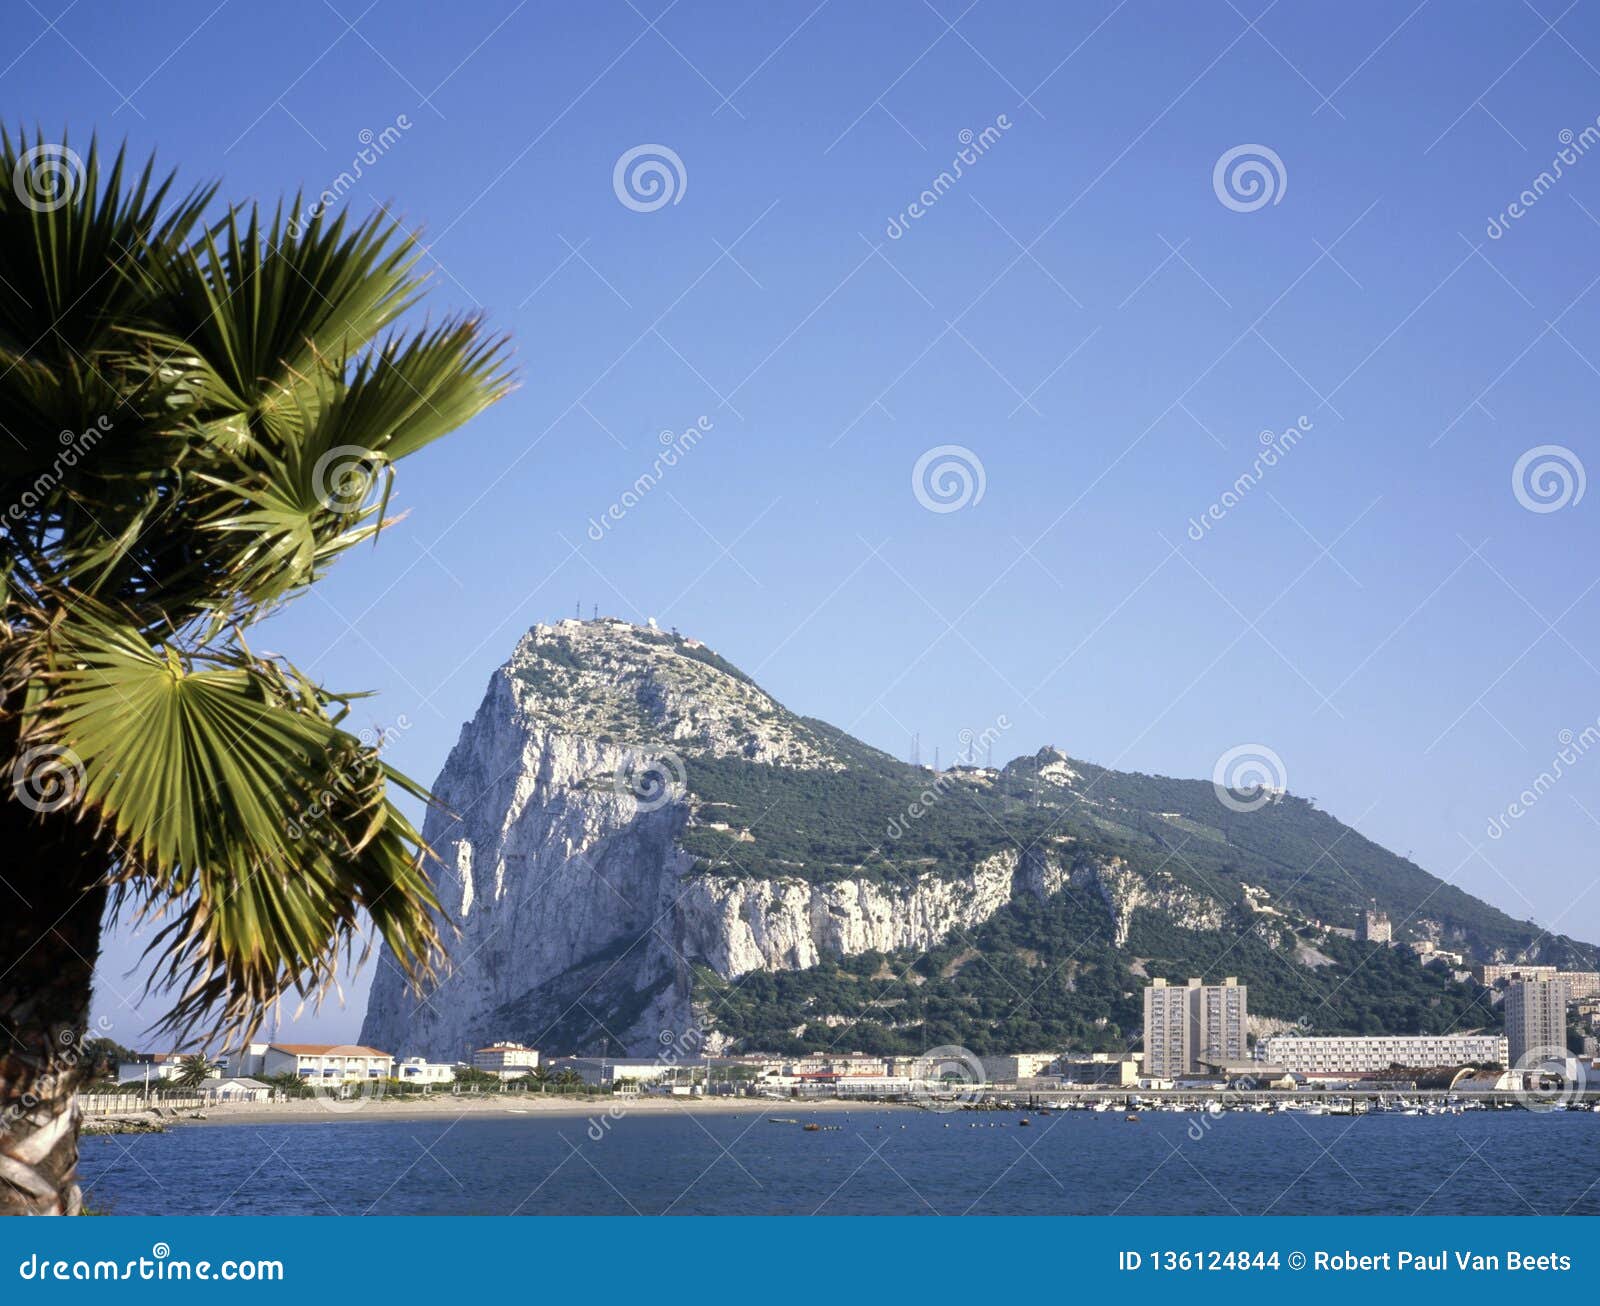 the rock from la linea in spain, gibraltar, europe